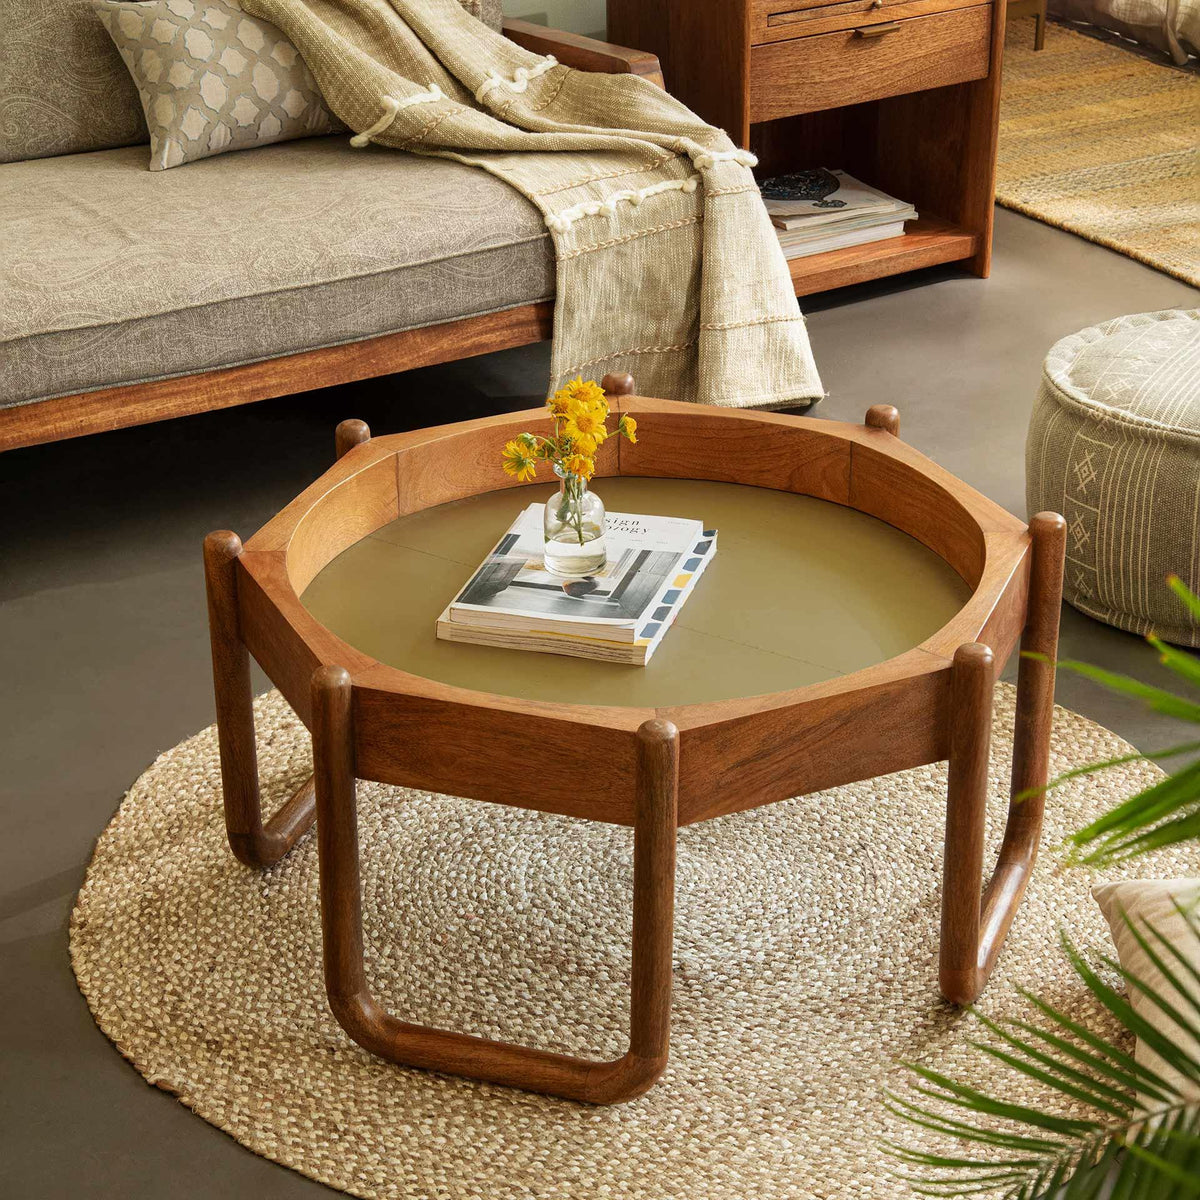 Bruno Octagon Coffee Table With Wooden Legs - ellementry